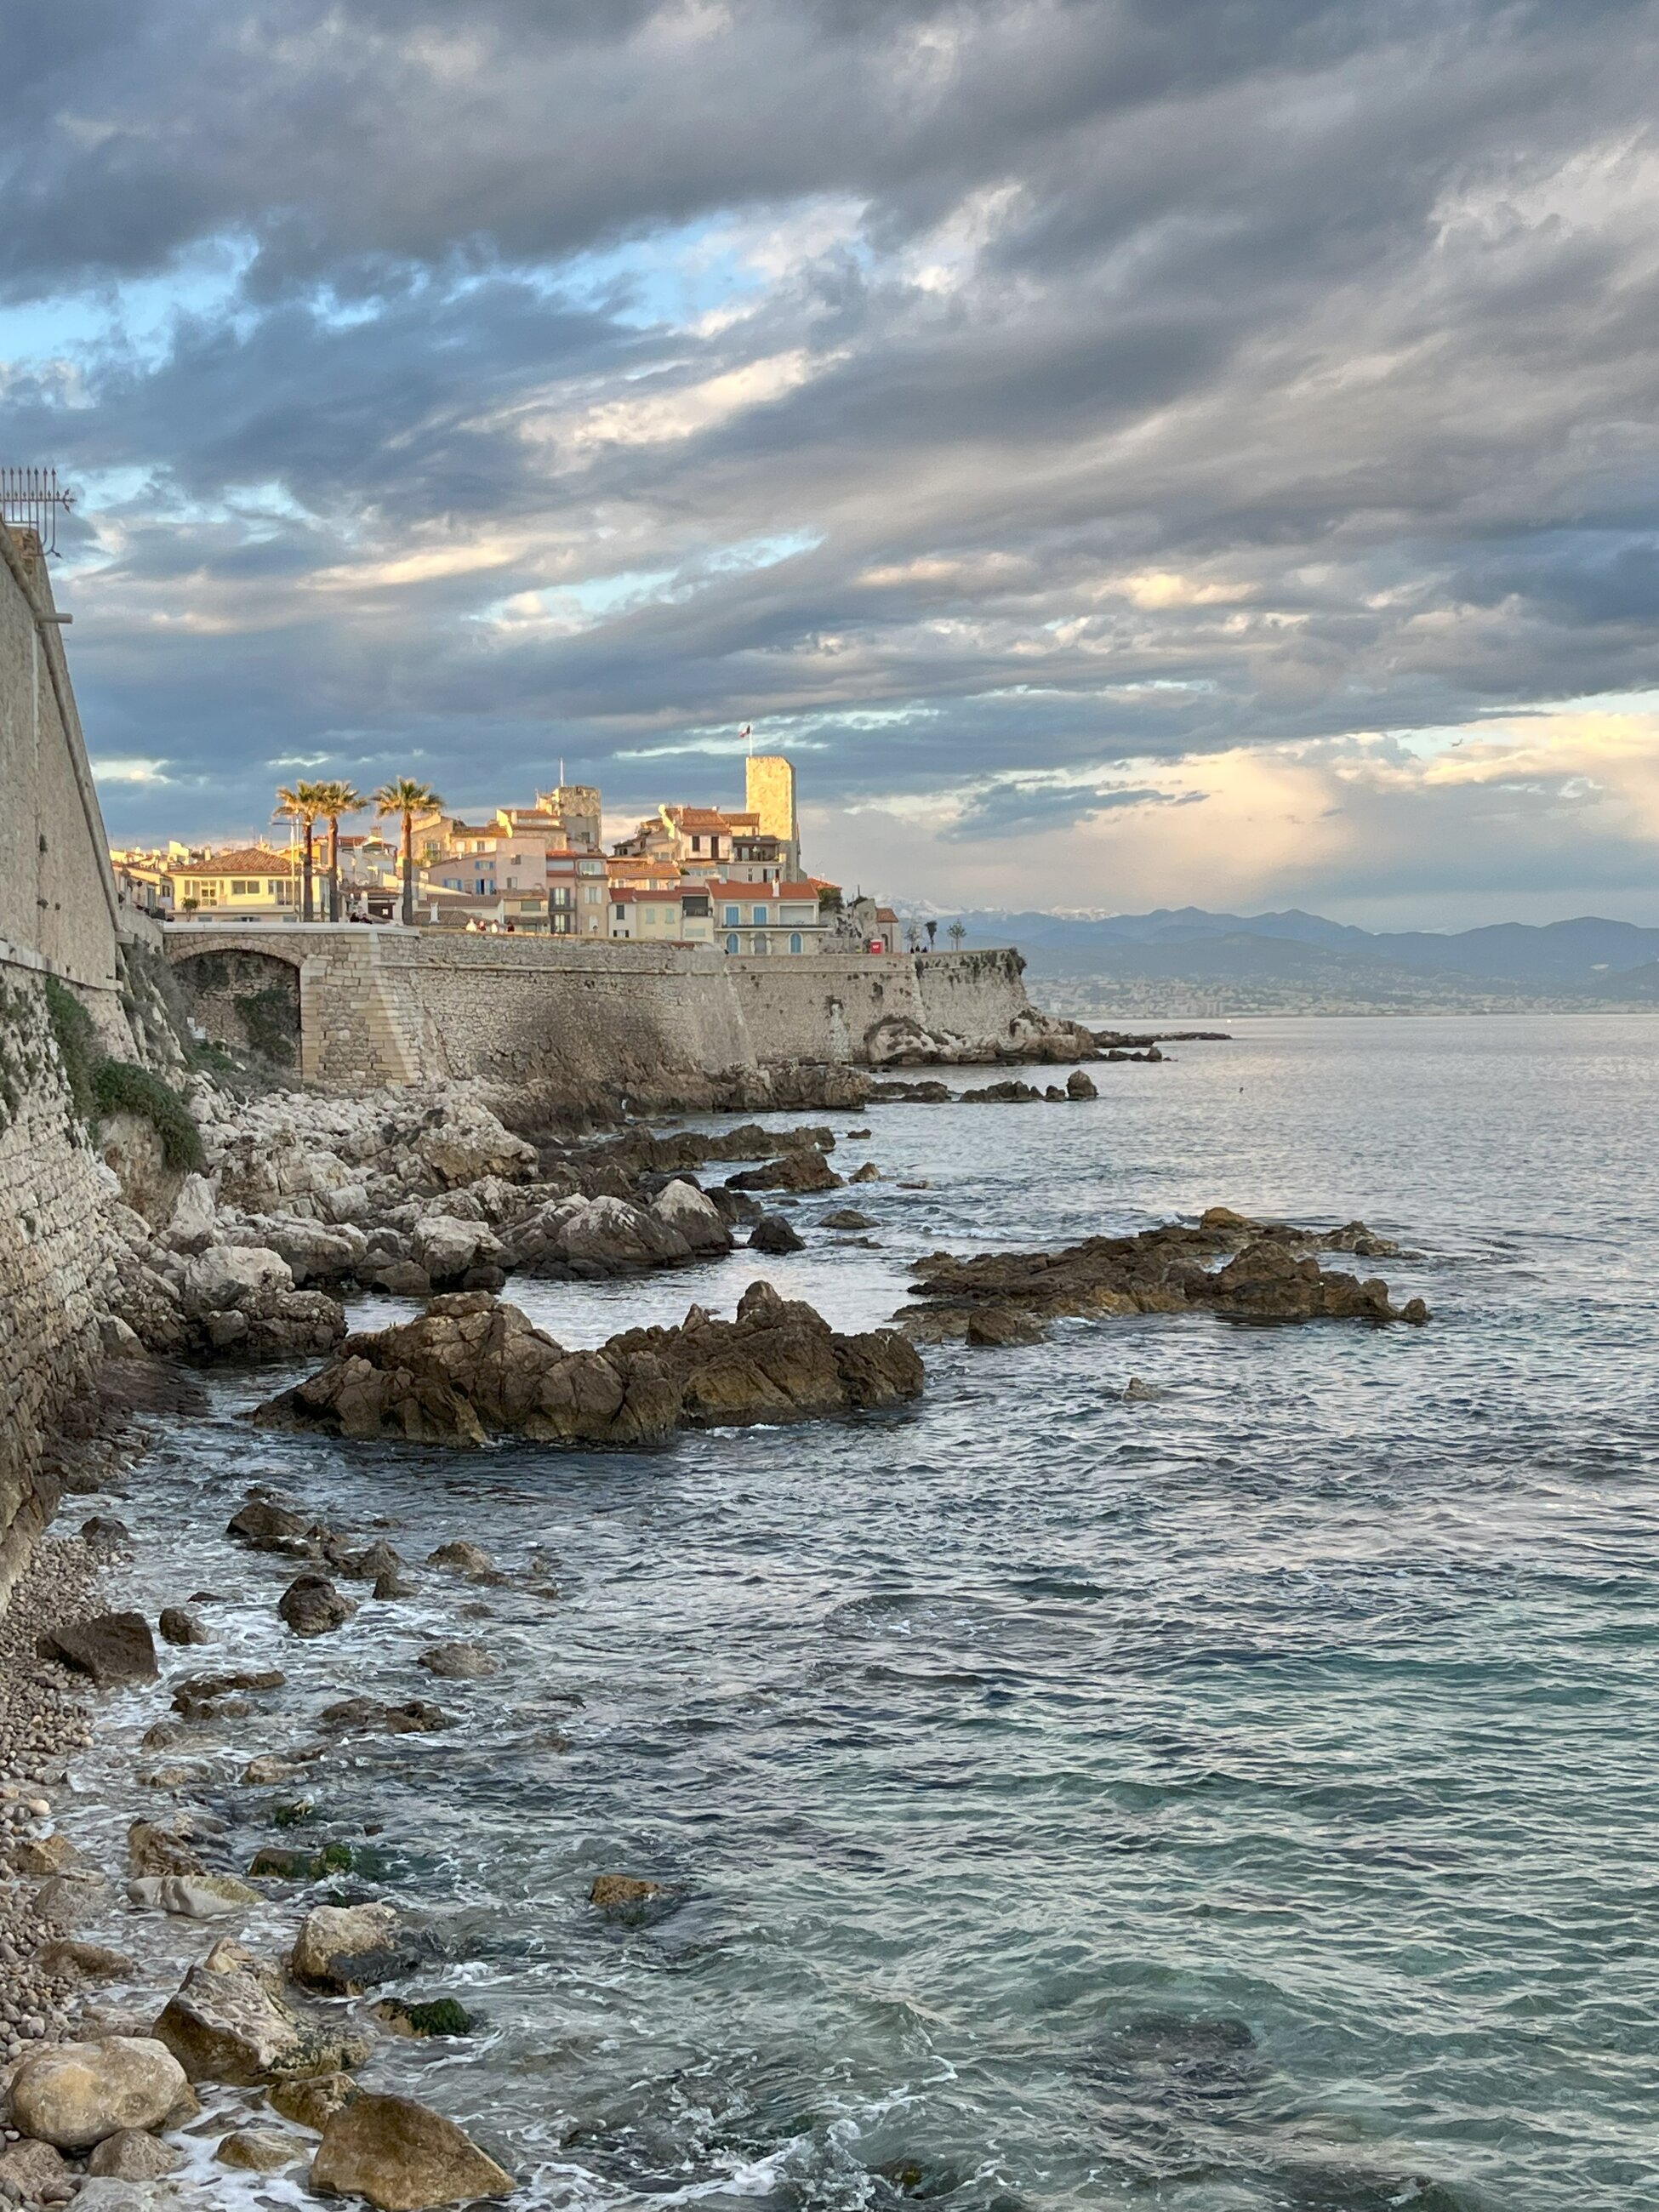 The view of Antibes from the coast - Breathtaking. 